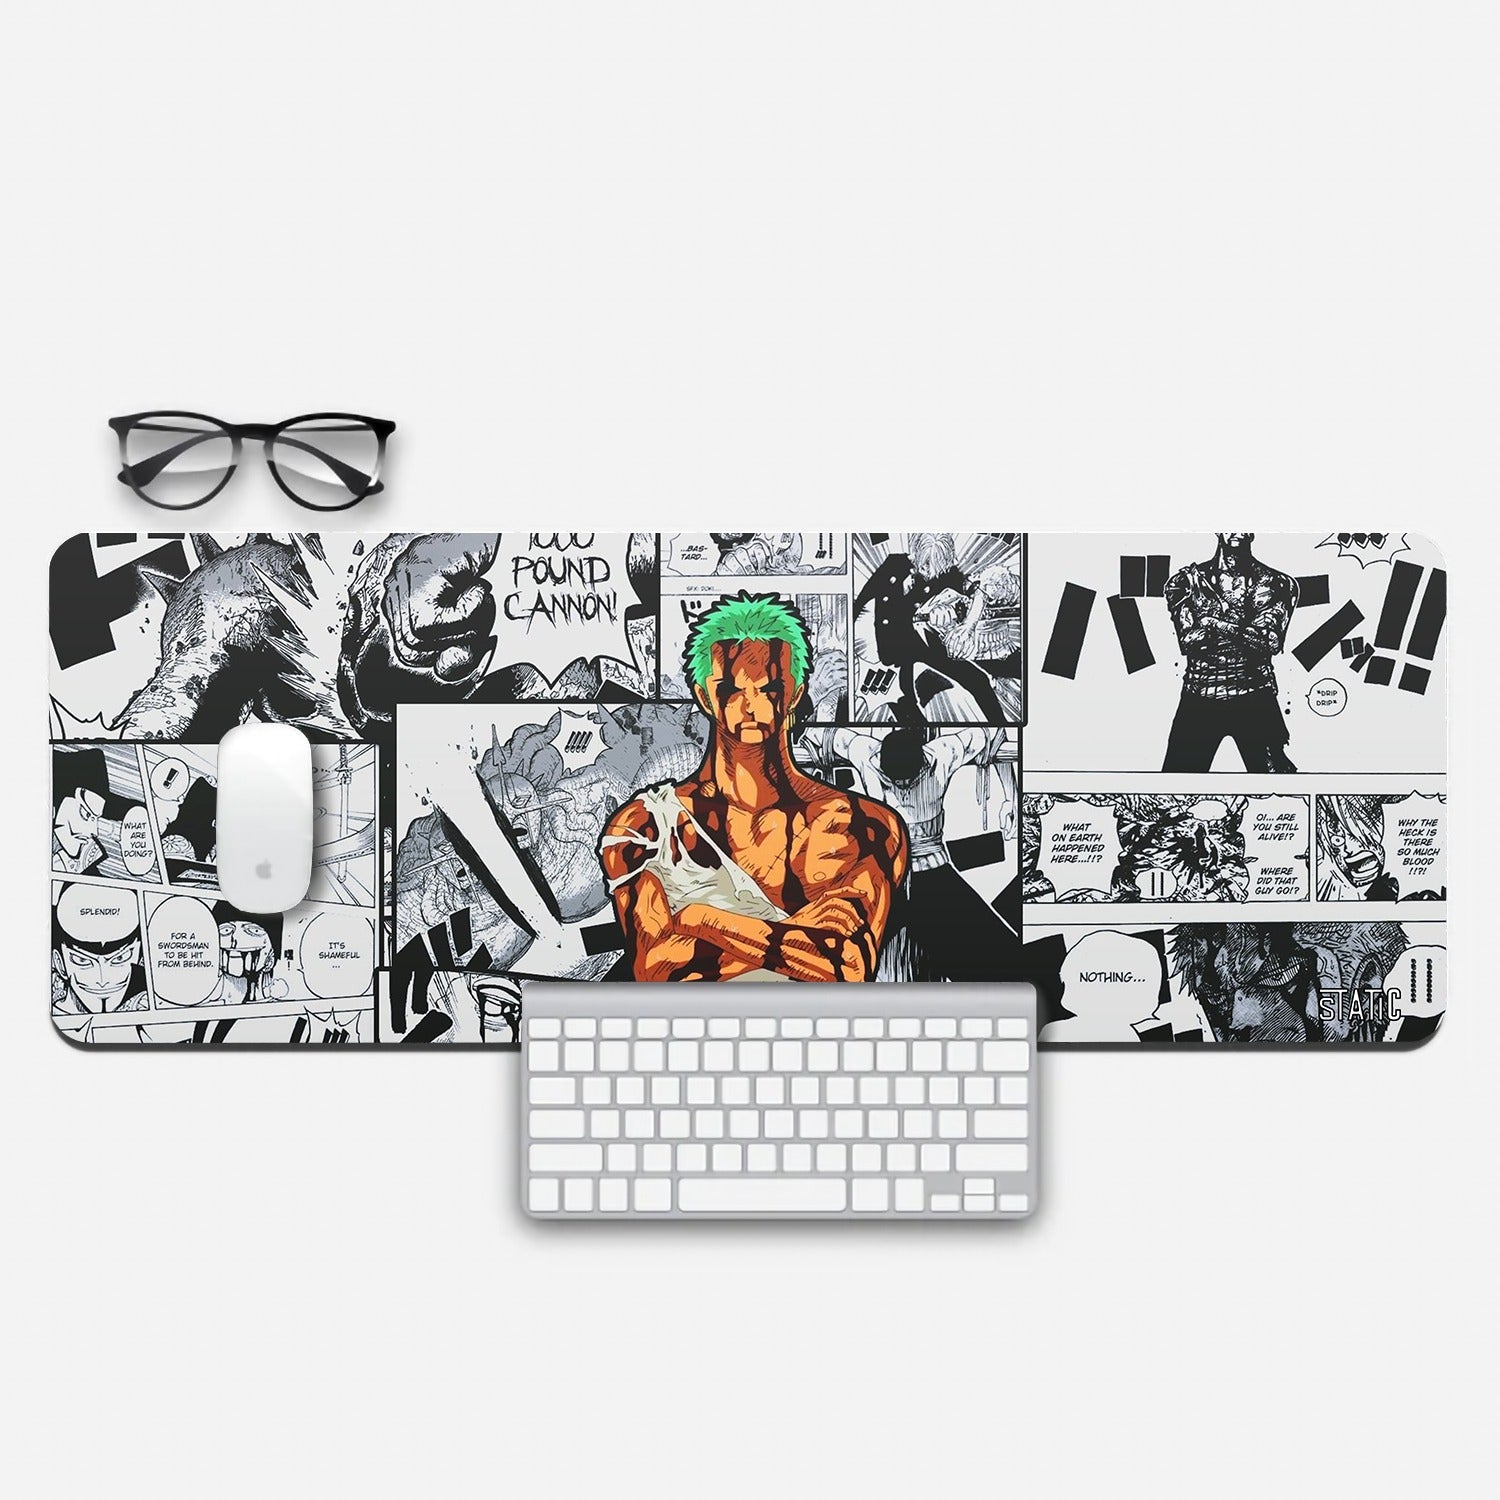 Experience One Piece like never before with our extended gaming mouse pad. Immerse yourself in the epic journey of Zoro, captured in a striking color image as he endures Luffy's pain from Kuma. Surrounding him, iconic black and white manga stills from Alabasta and Baratie. Elevate your gaming setup with this powerful accessory and relive the Straw Hat crew's adventures. Order now and become part of the ultimate pirate saga!